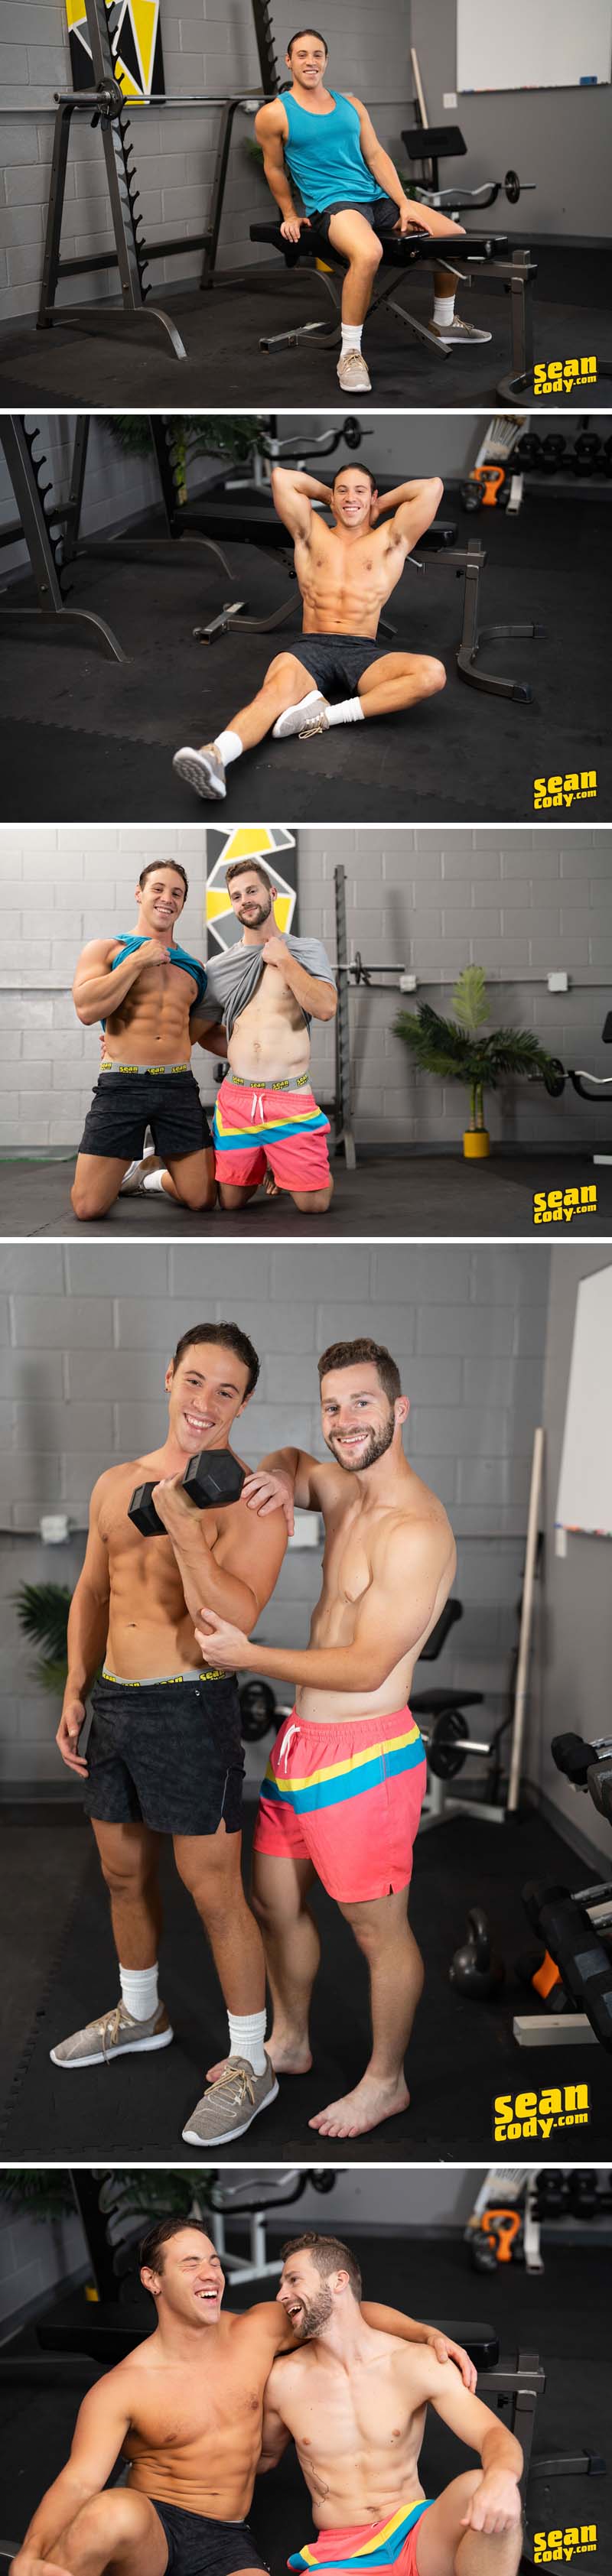 Robbie and Kyle Fletcher's Intense Gym Fuck Session at SeanCody